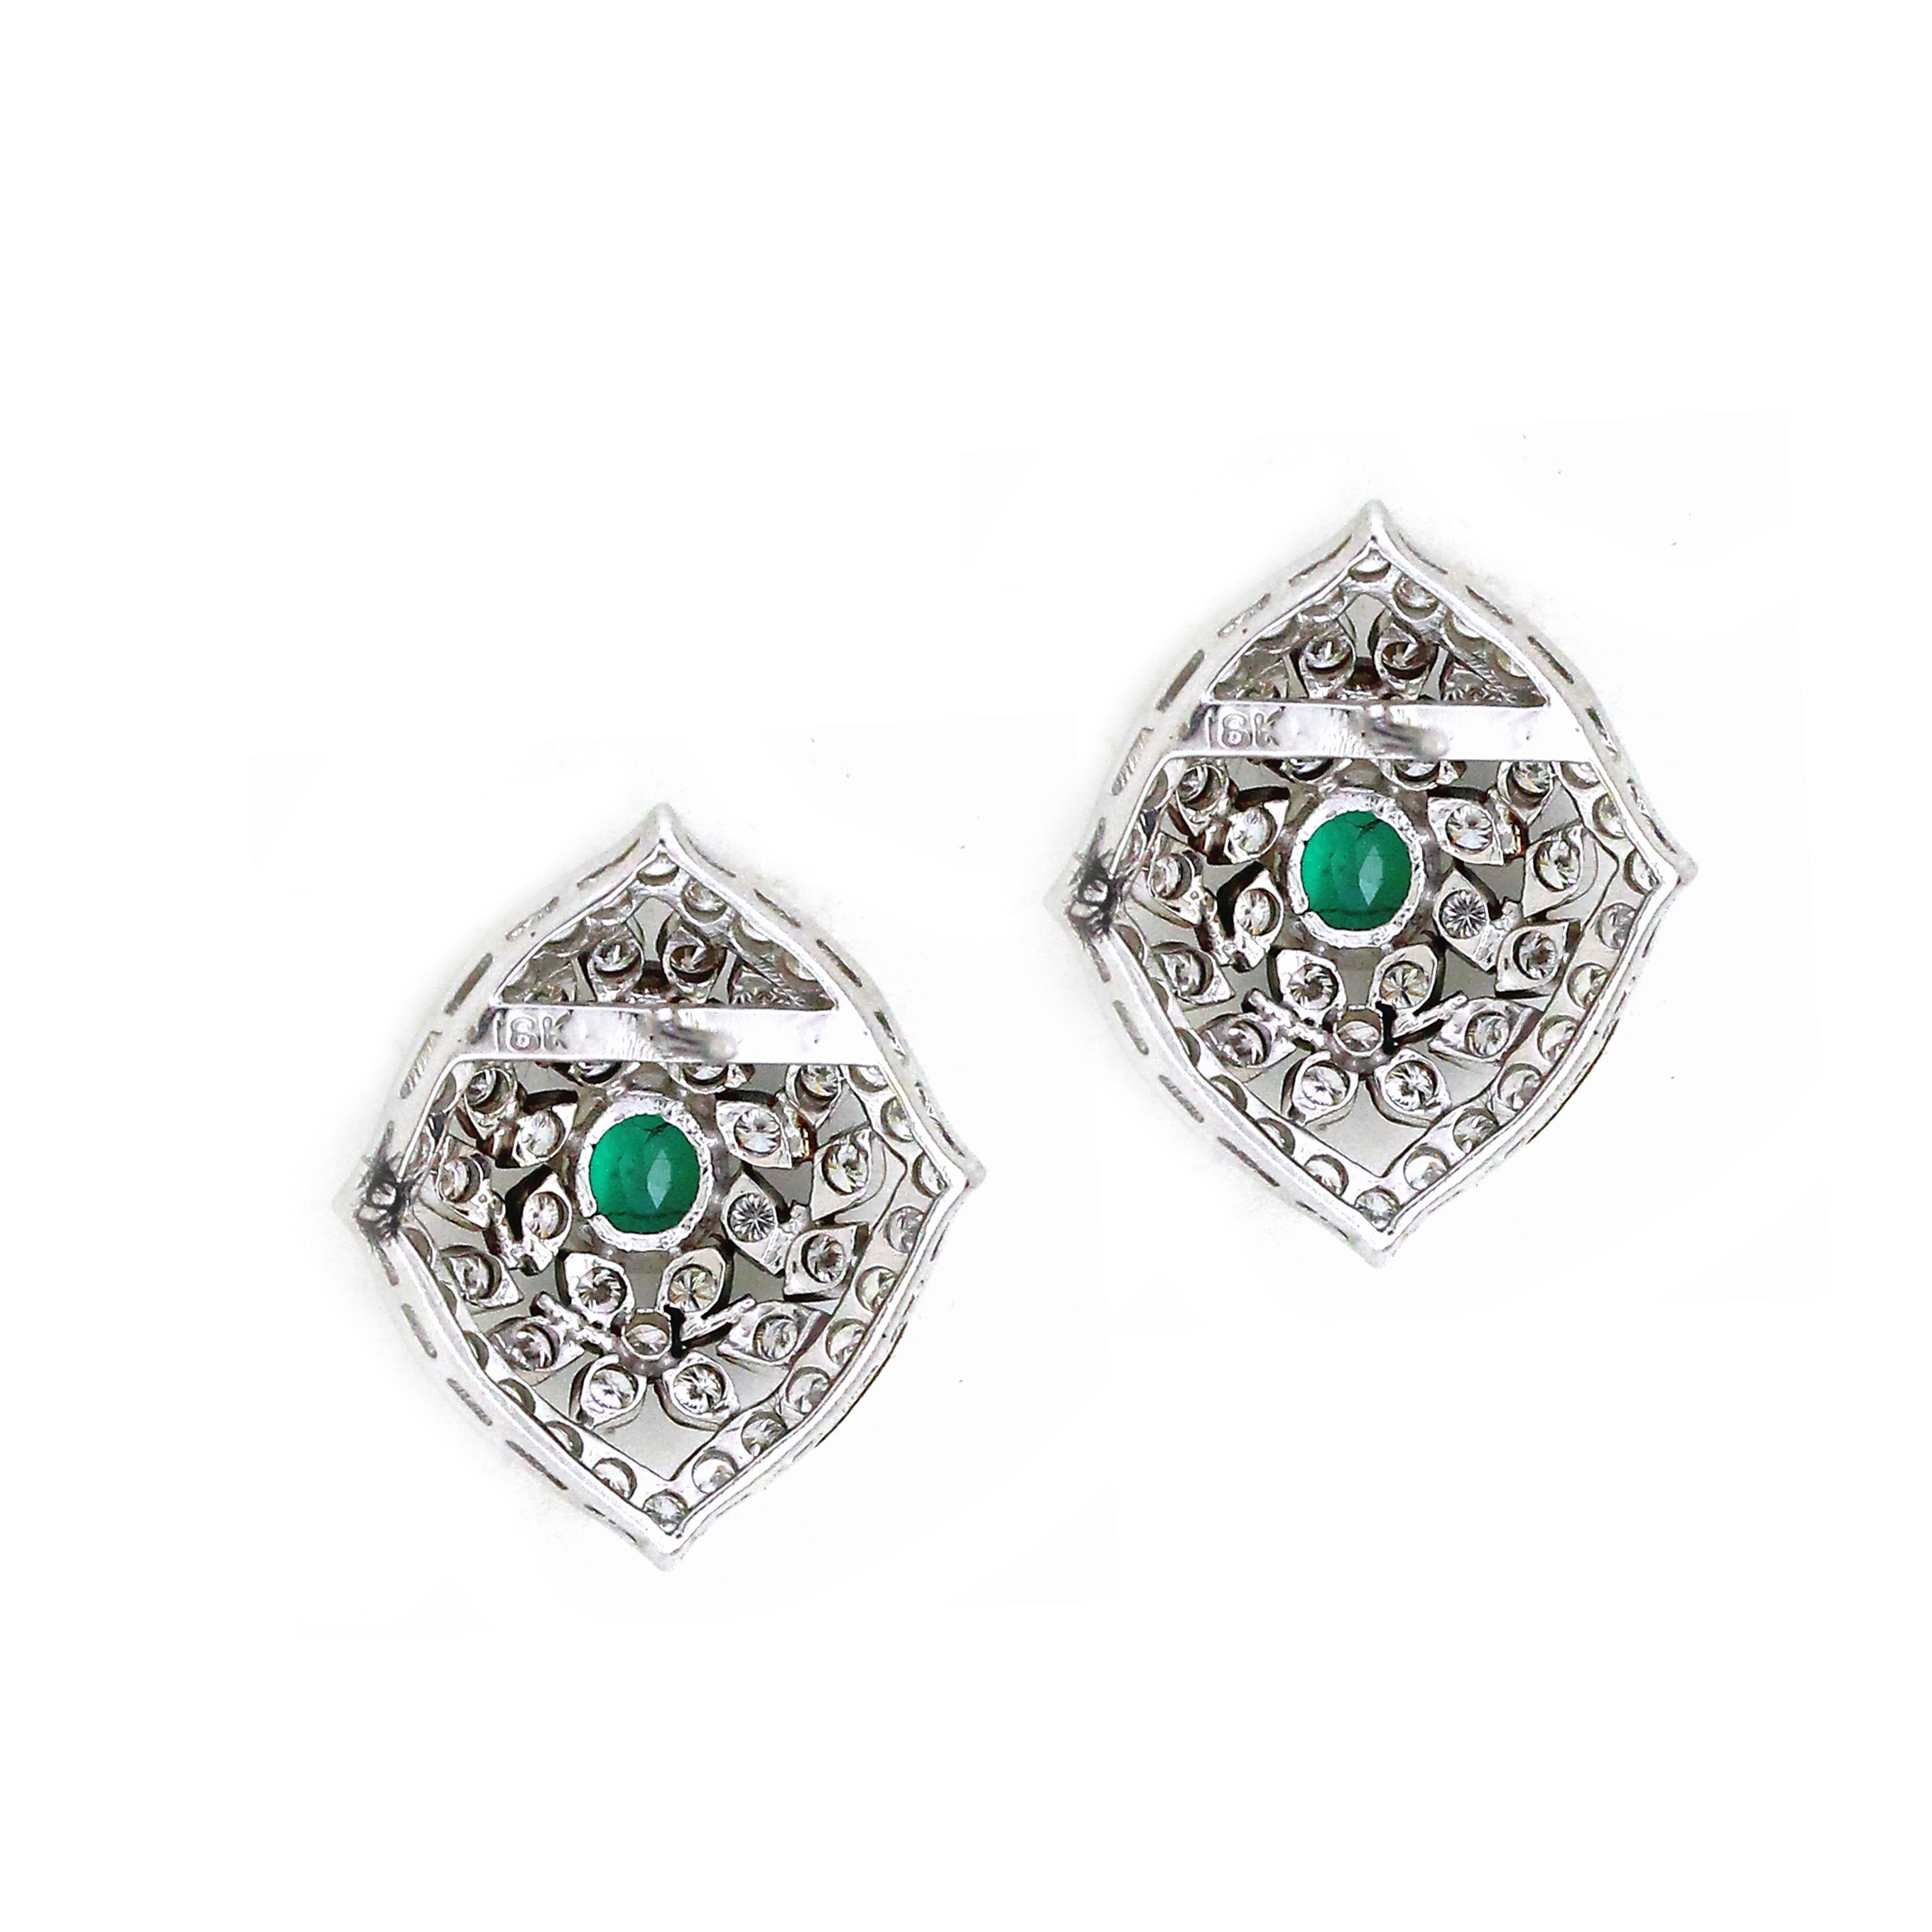 Oval Cut 0.9 carats of emerald Earrings For Sale